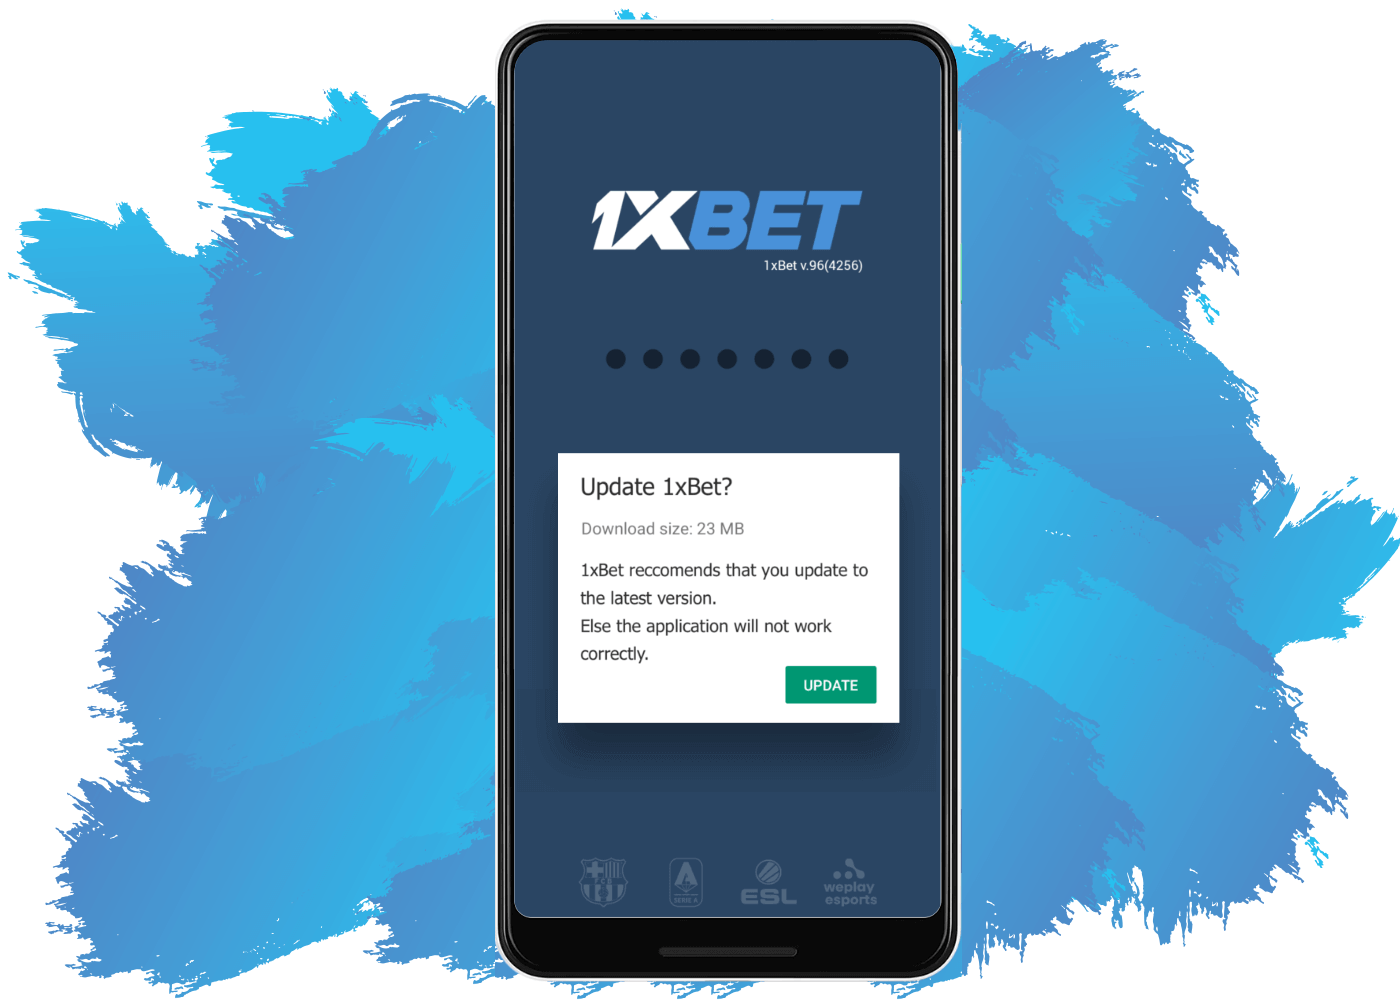 Update options at 1xbet application